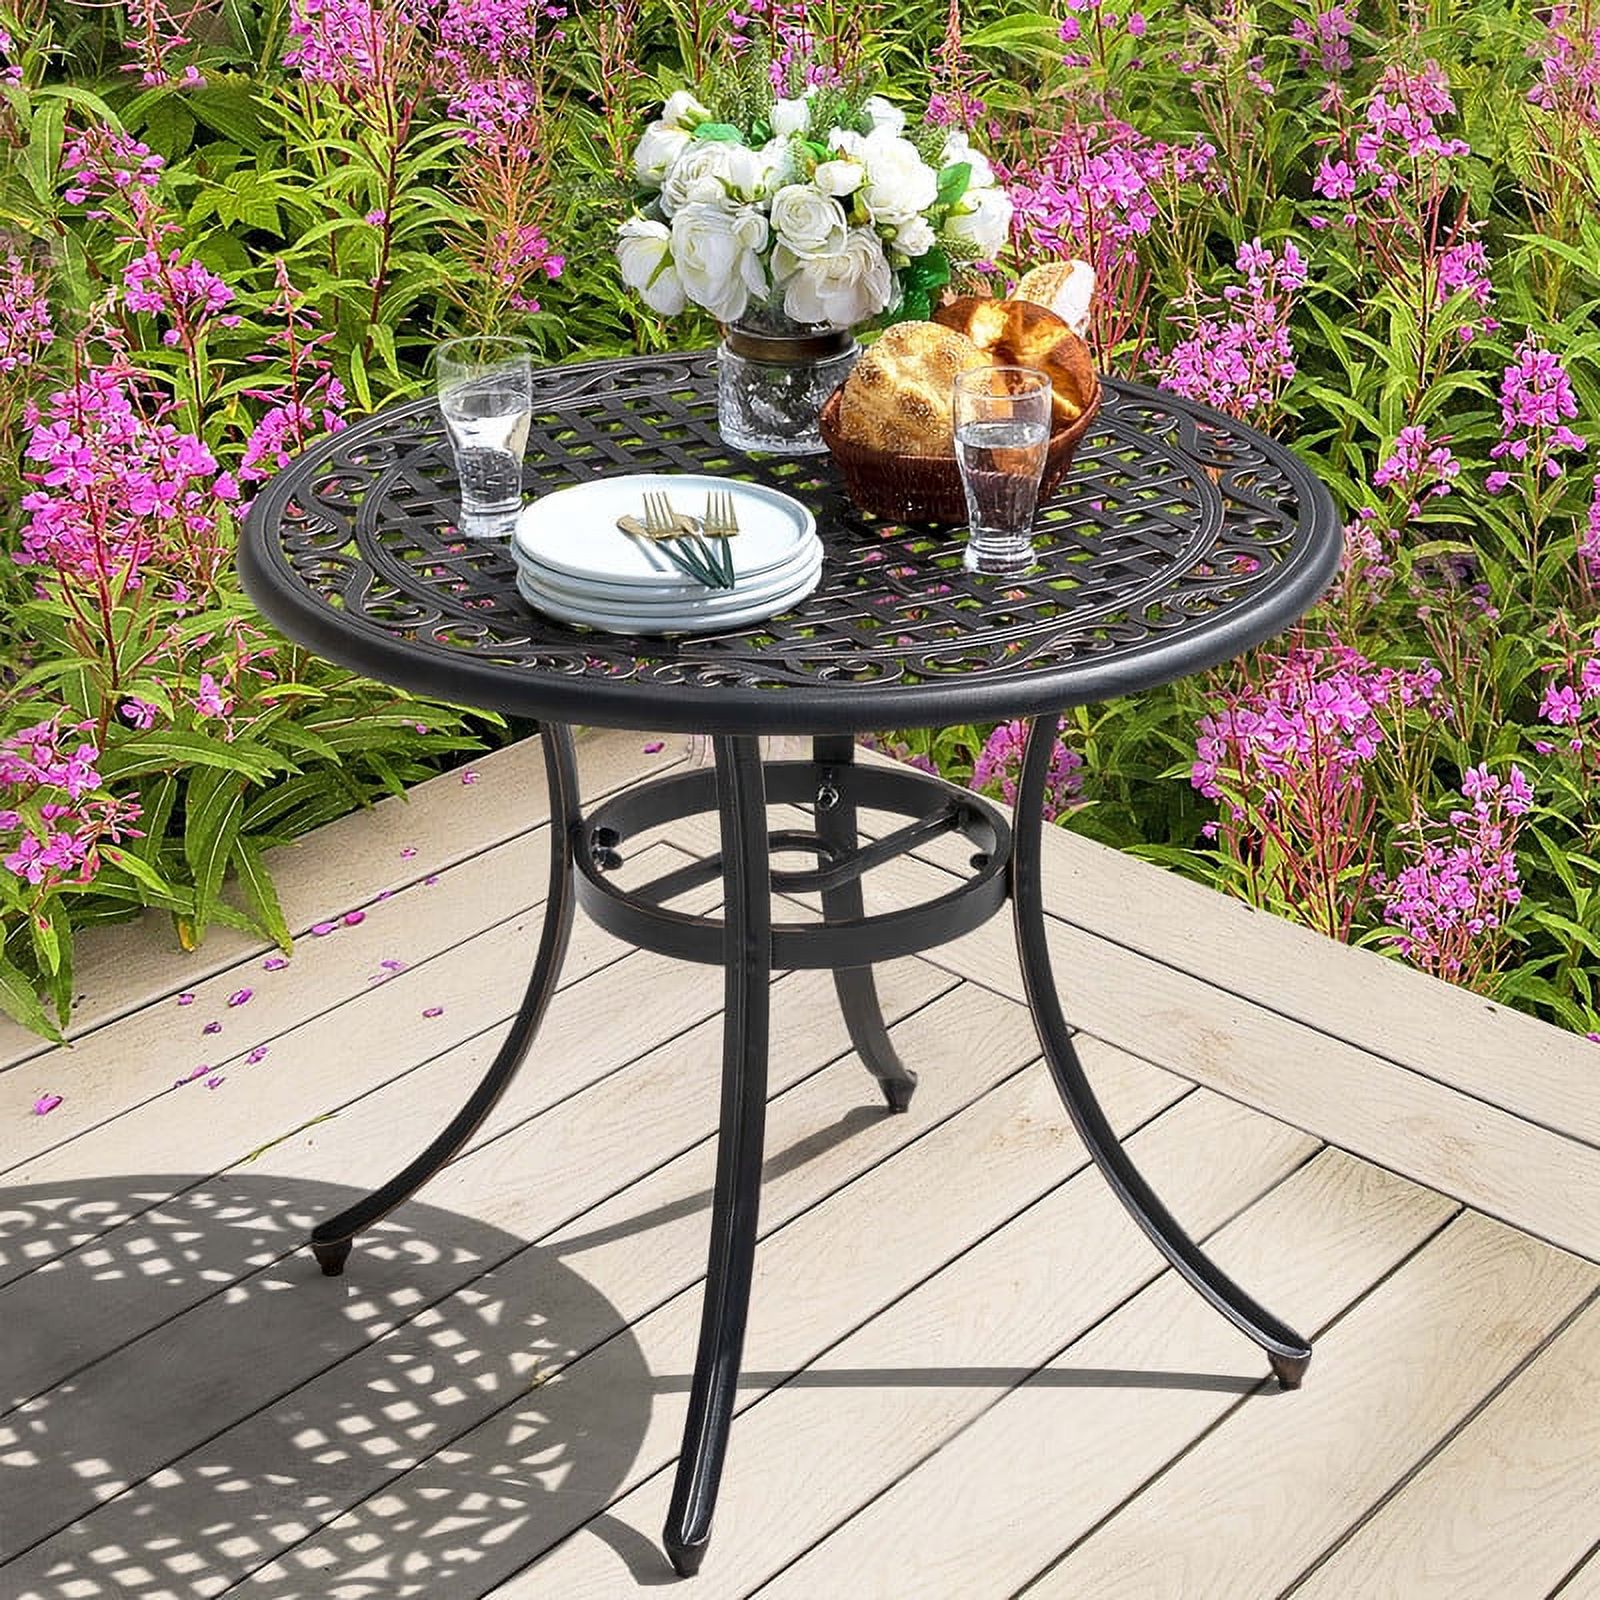 Nuu Garden 36" Cast Aluminum Outdoor Dining Table Round Patio Bistro Dining Table with Umbrella Hole,Black with Antique Bronze at The Edge - image 2 of 9